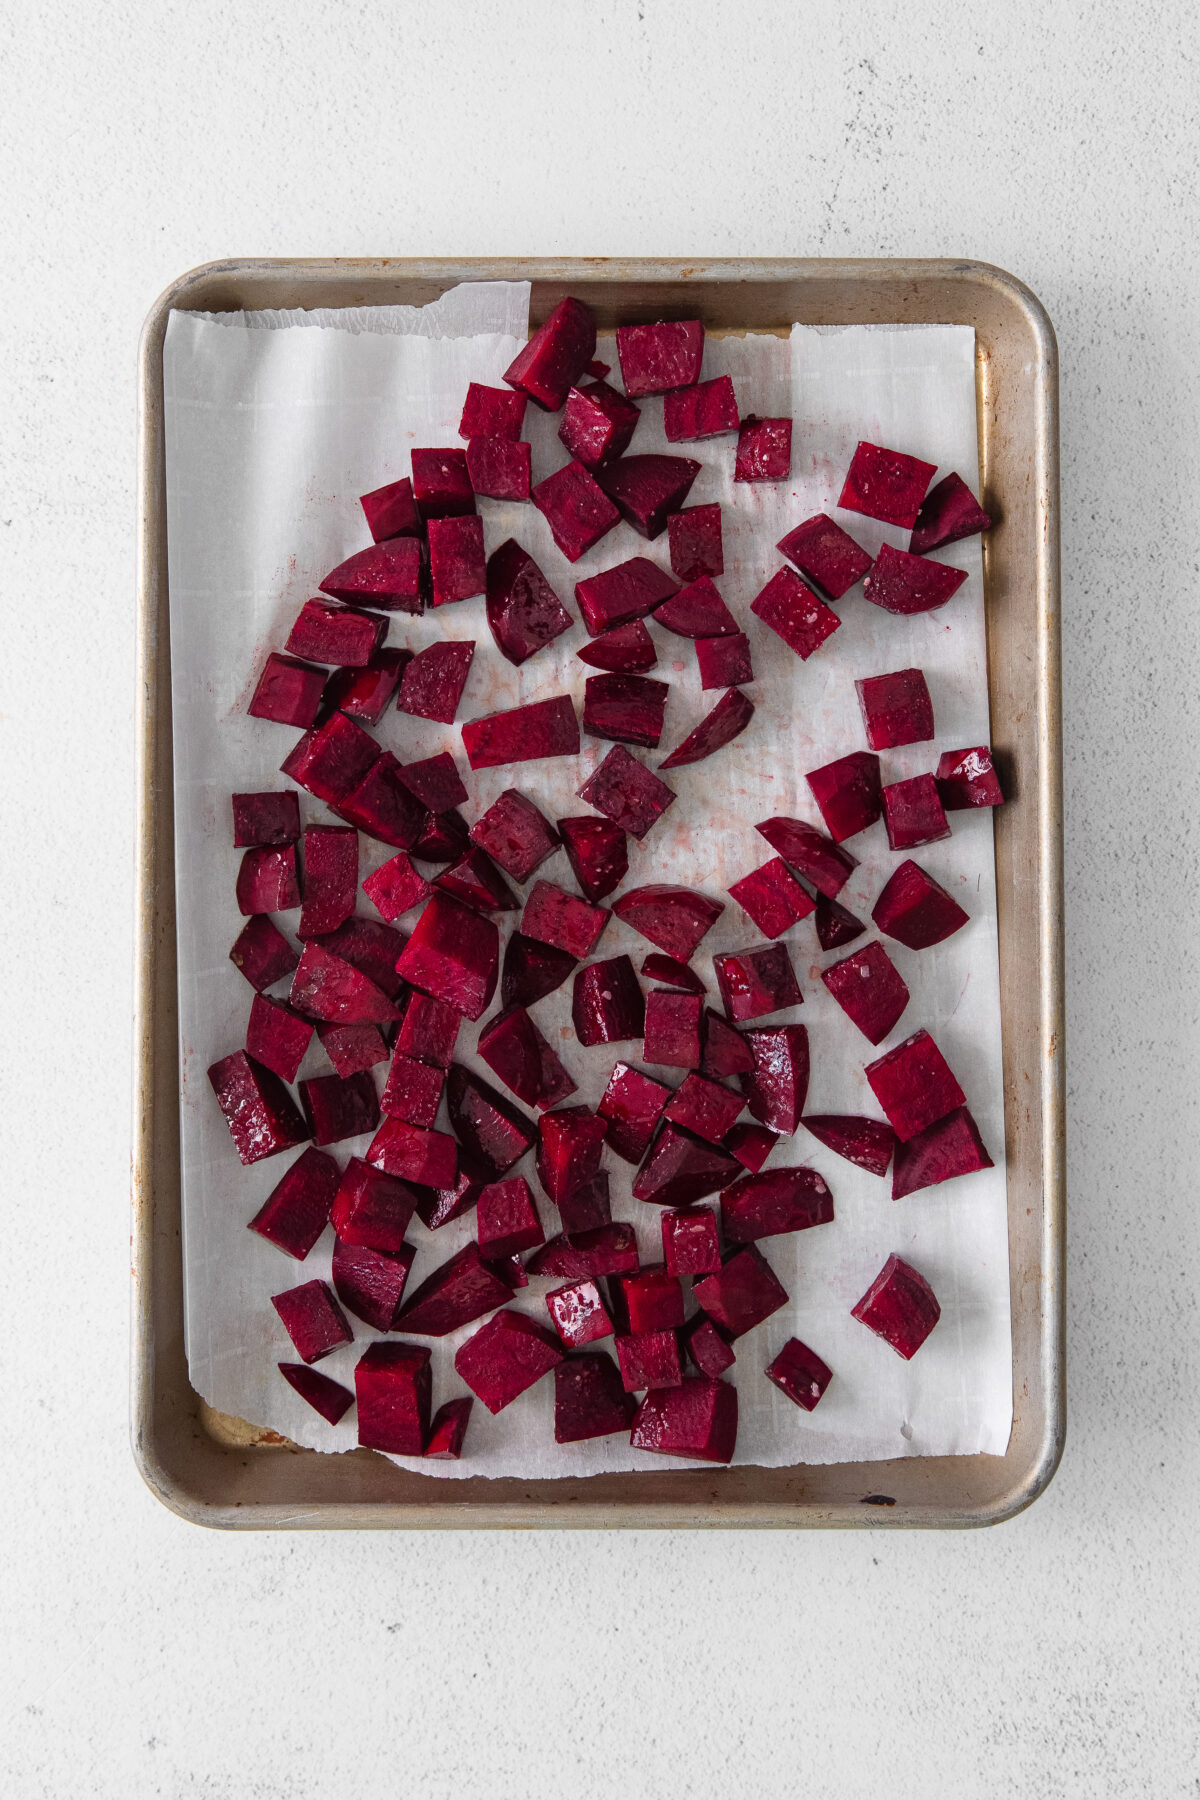 Chopped beets on a sheet pan lined with parchment paper.